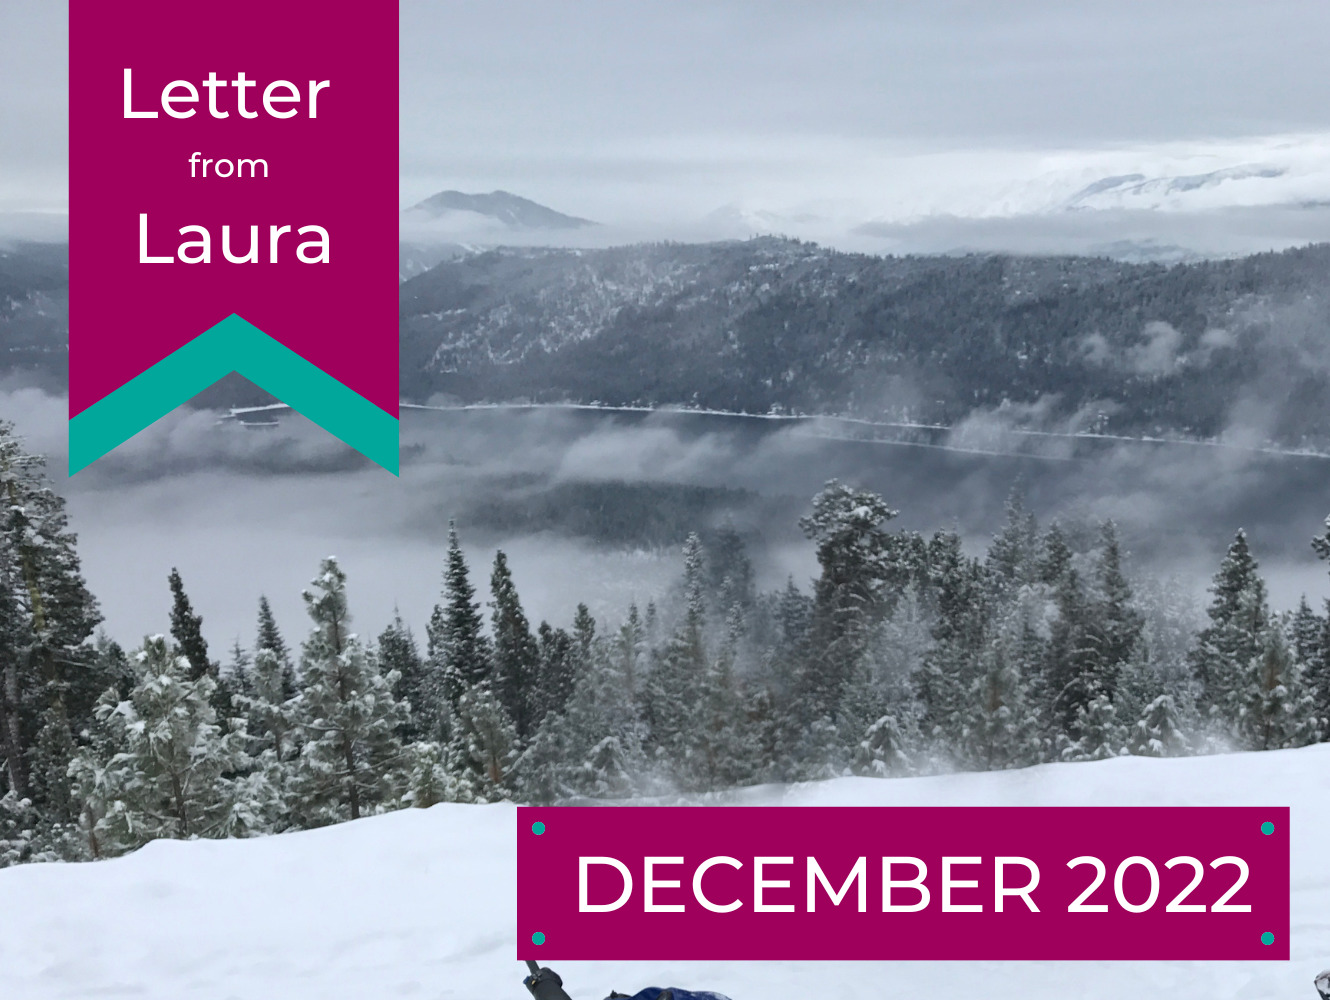 Letter from Laura, December 2022. A view of Lake Wenatchee is shown covered in snow from a mountain side.